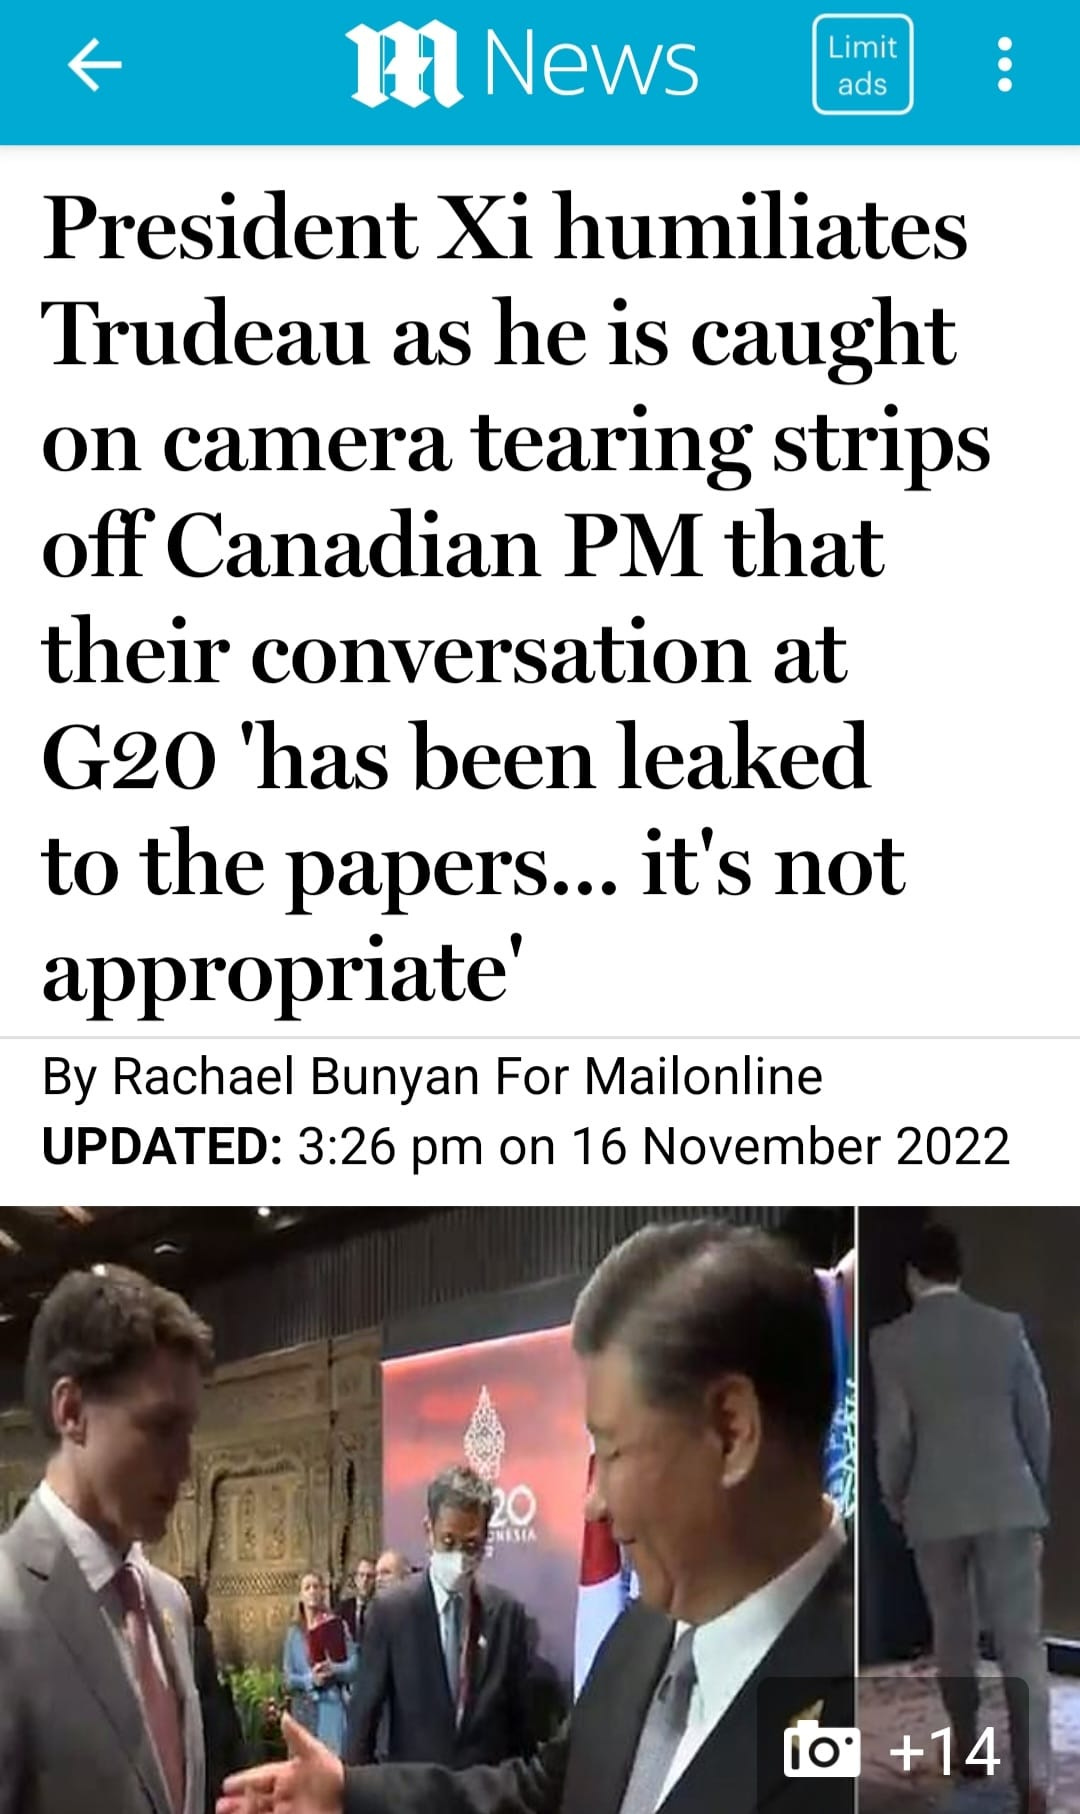 May be an image of 4 people, people standing and text that says 'm News Limit ads President Xi humiliates Trudeau as he is caught on camera tearing strips off Canadian PM that their conversation at G20 'has been leaked to the papers... it's not appropriate' By Rachael Bunyan For Mailonline UPDATED: 3:26 pm on 16 November 2022 NESIA +14'